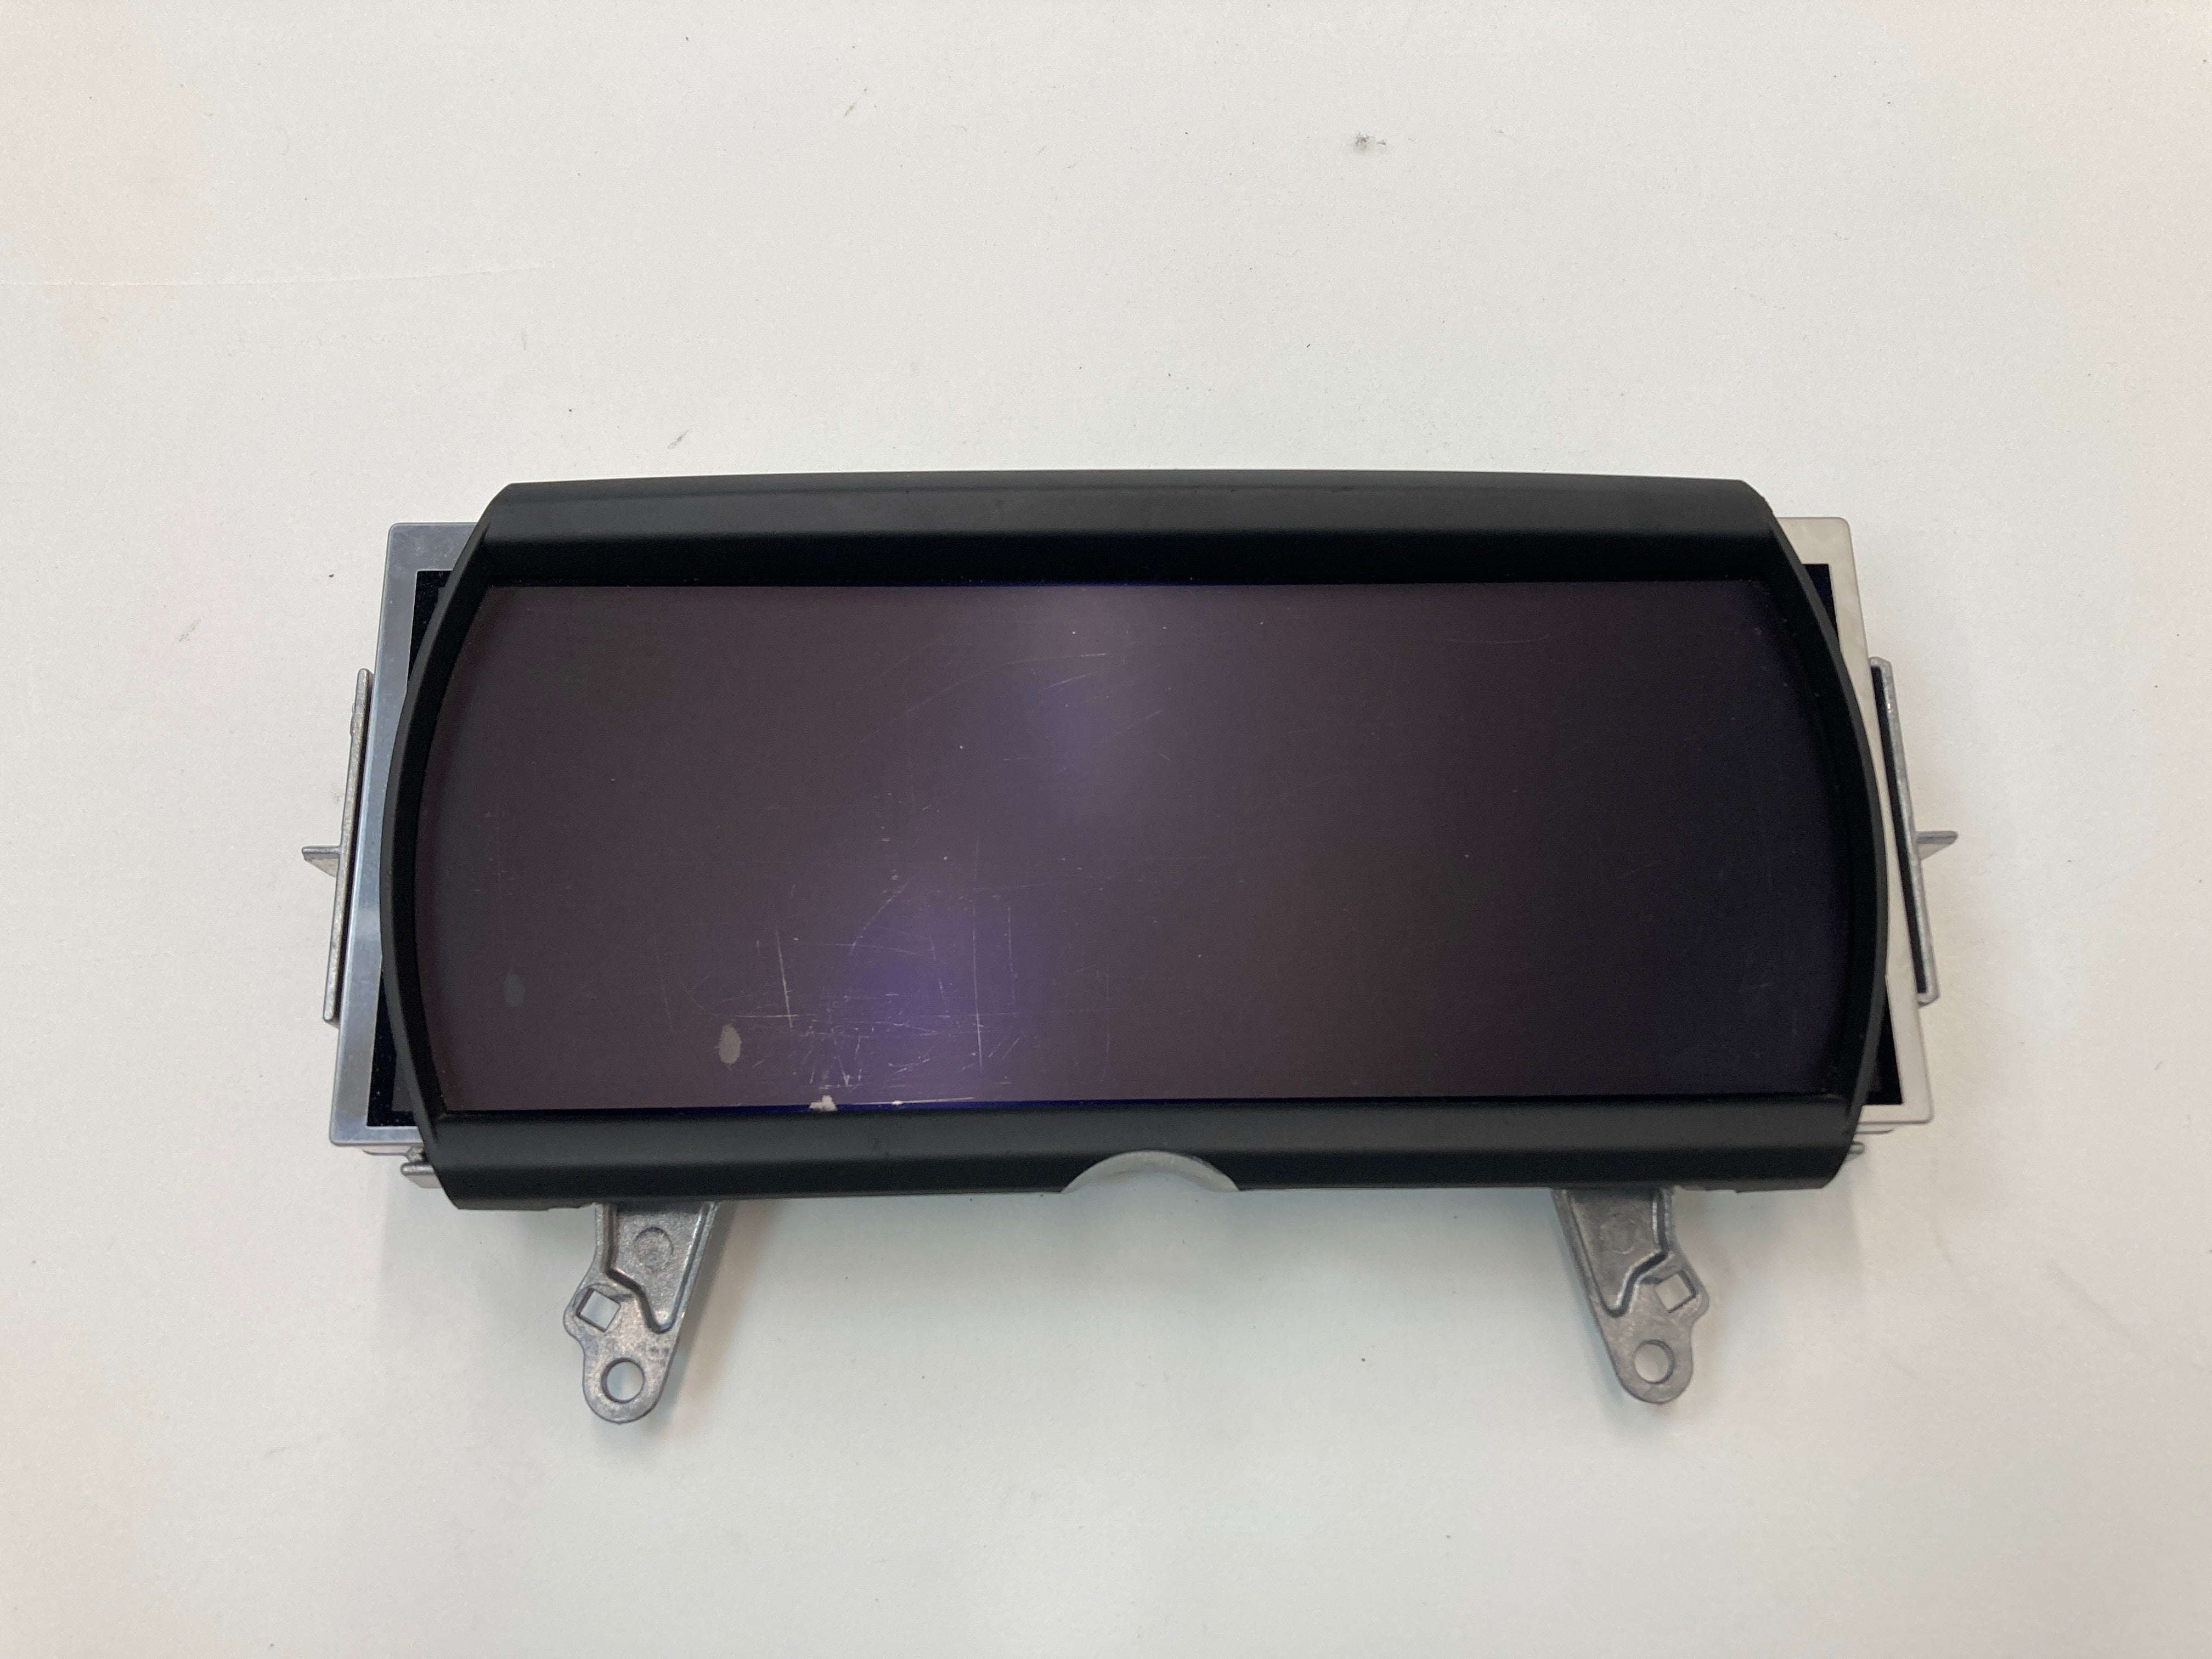 Mini Cooper Central Information Display 8.8